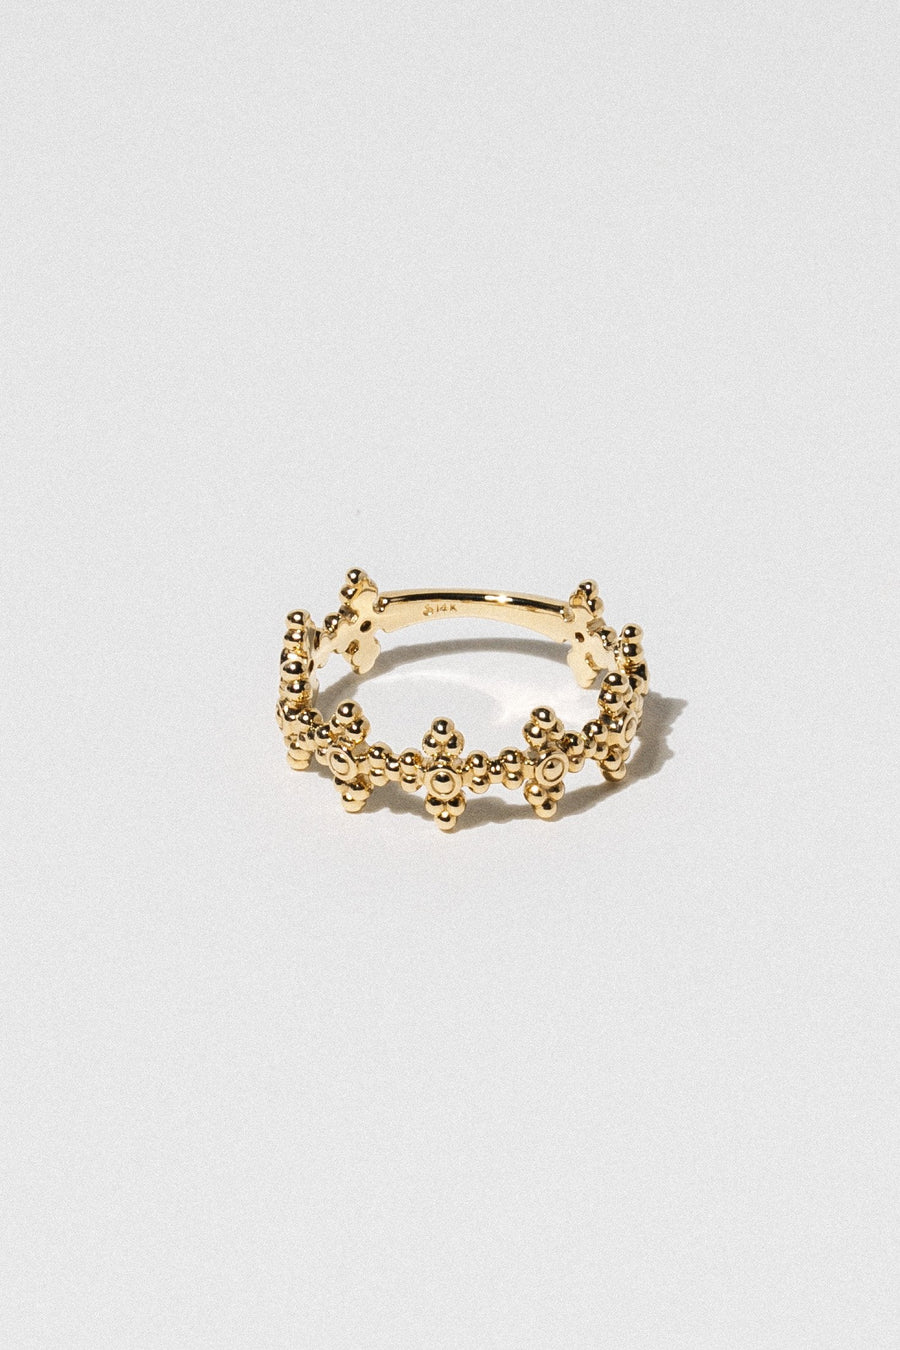 Stuller Jewelry Gold / US 7 Angelico Ring